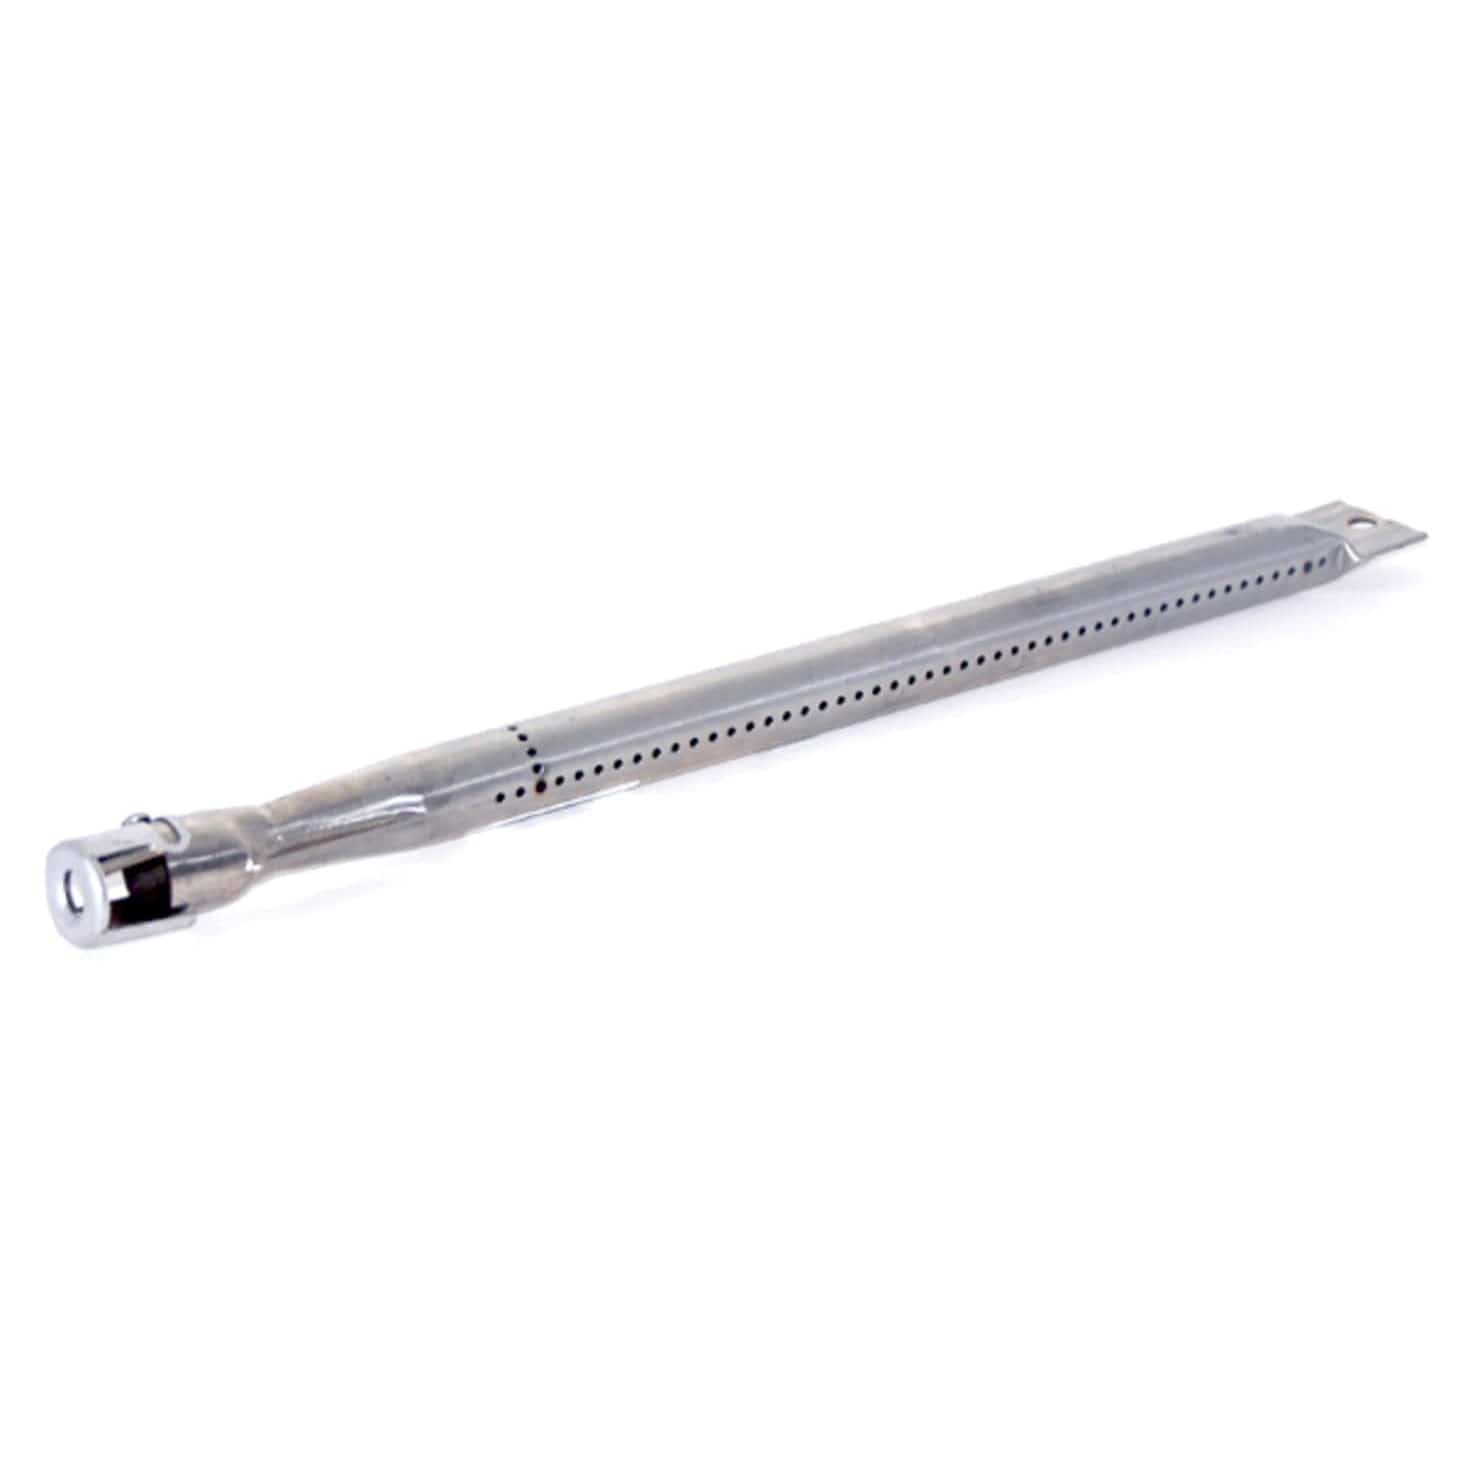 MHP PFT1 Stainless Steel Tube Burner for Perfect Flame